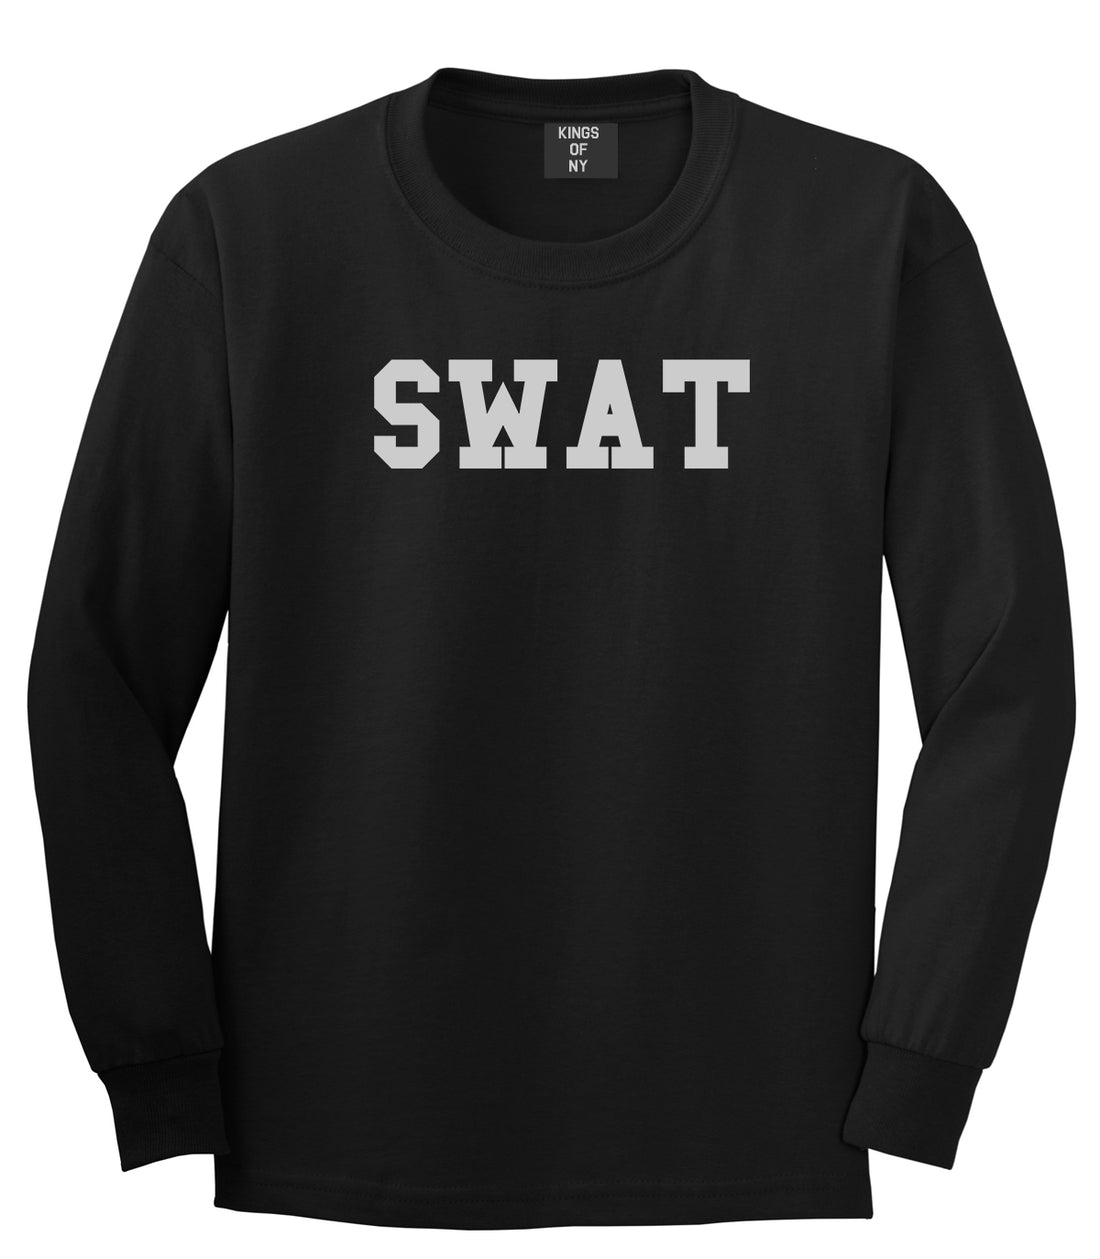 Swat Law Enforcement Mens Black Long Sleeve T-Shirt by KINGS OF NY